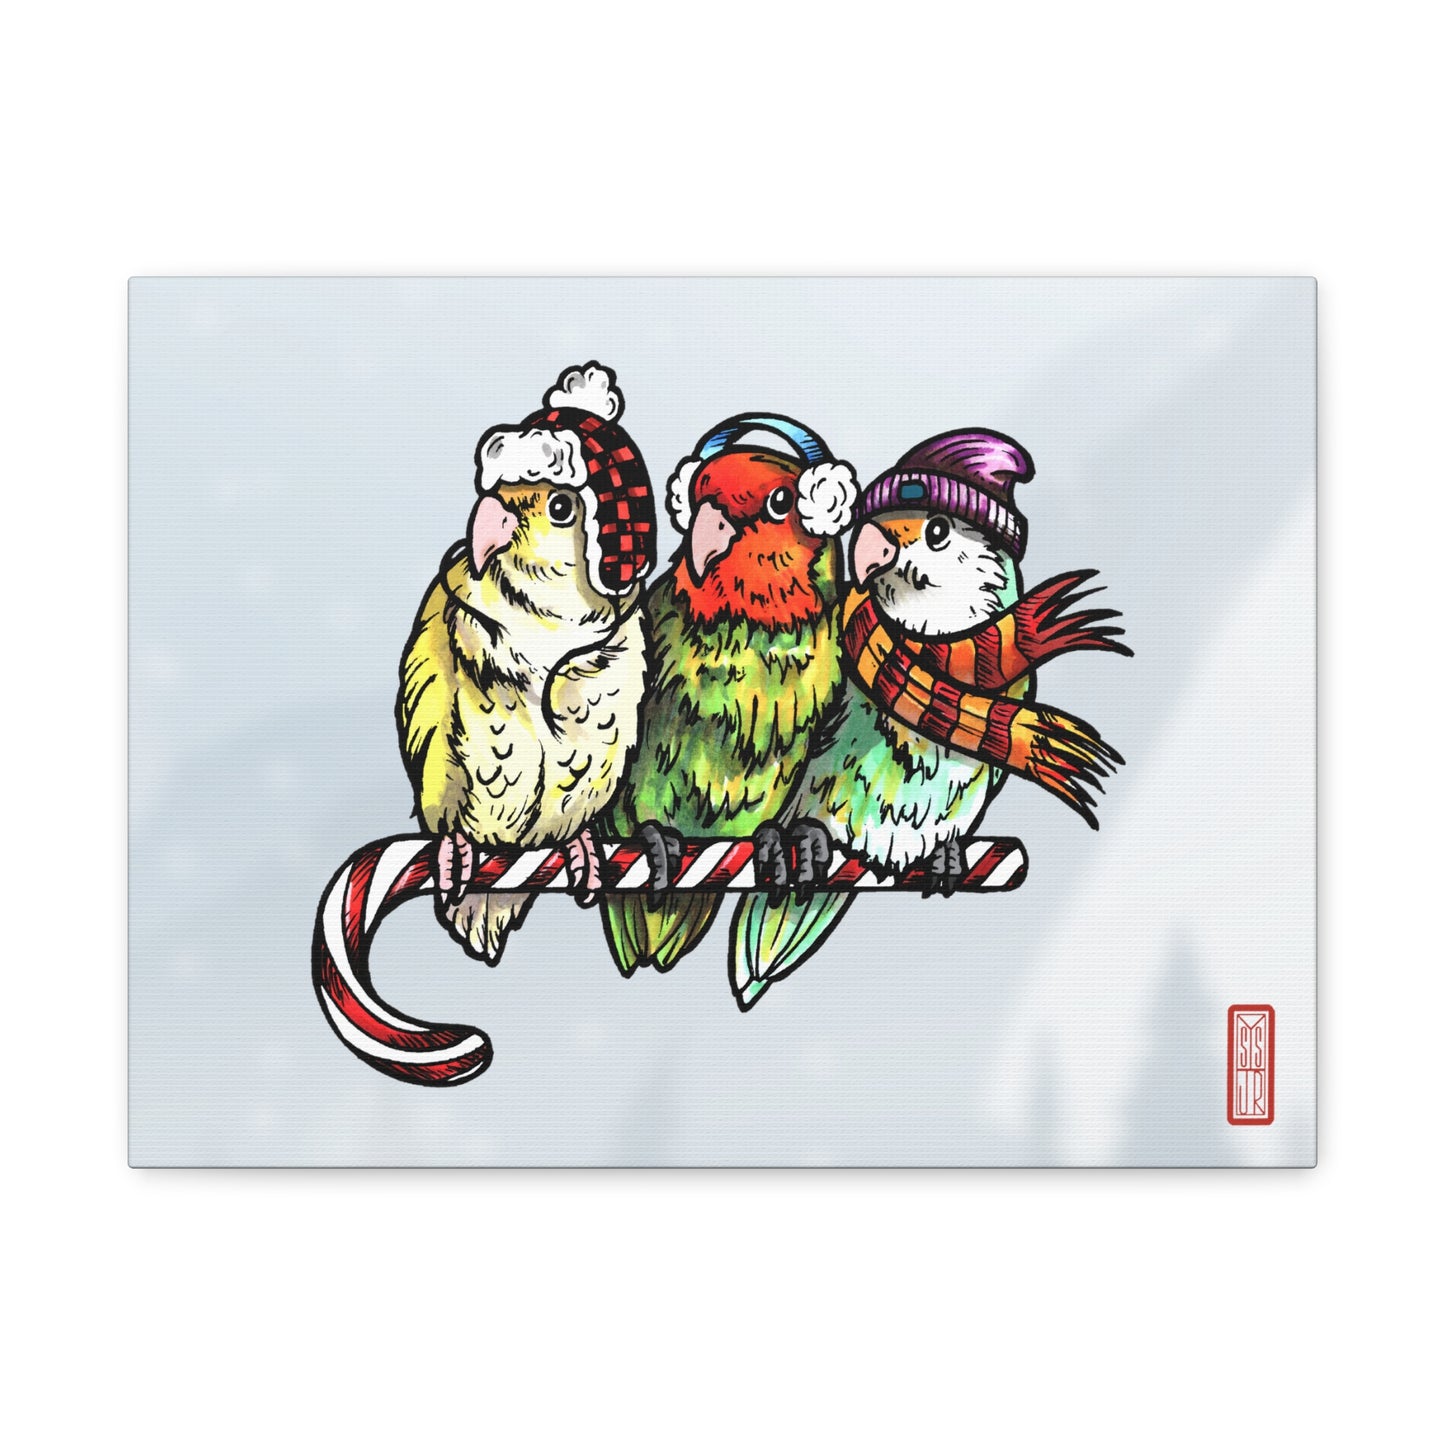 3 Lovebirds with Winter Wear & Perched on a Candy Cane, Canvas Wrap Wall Art